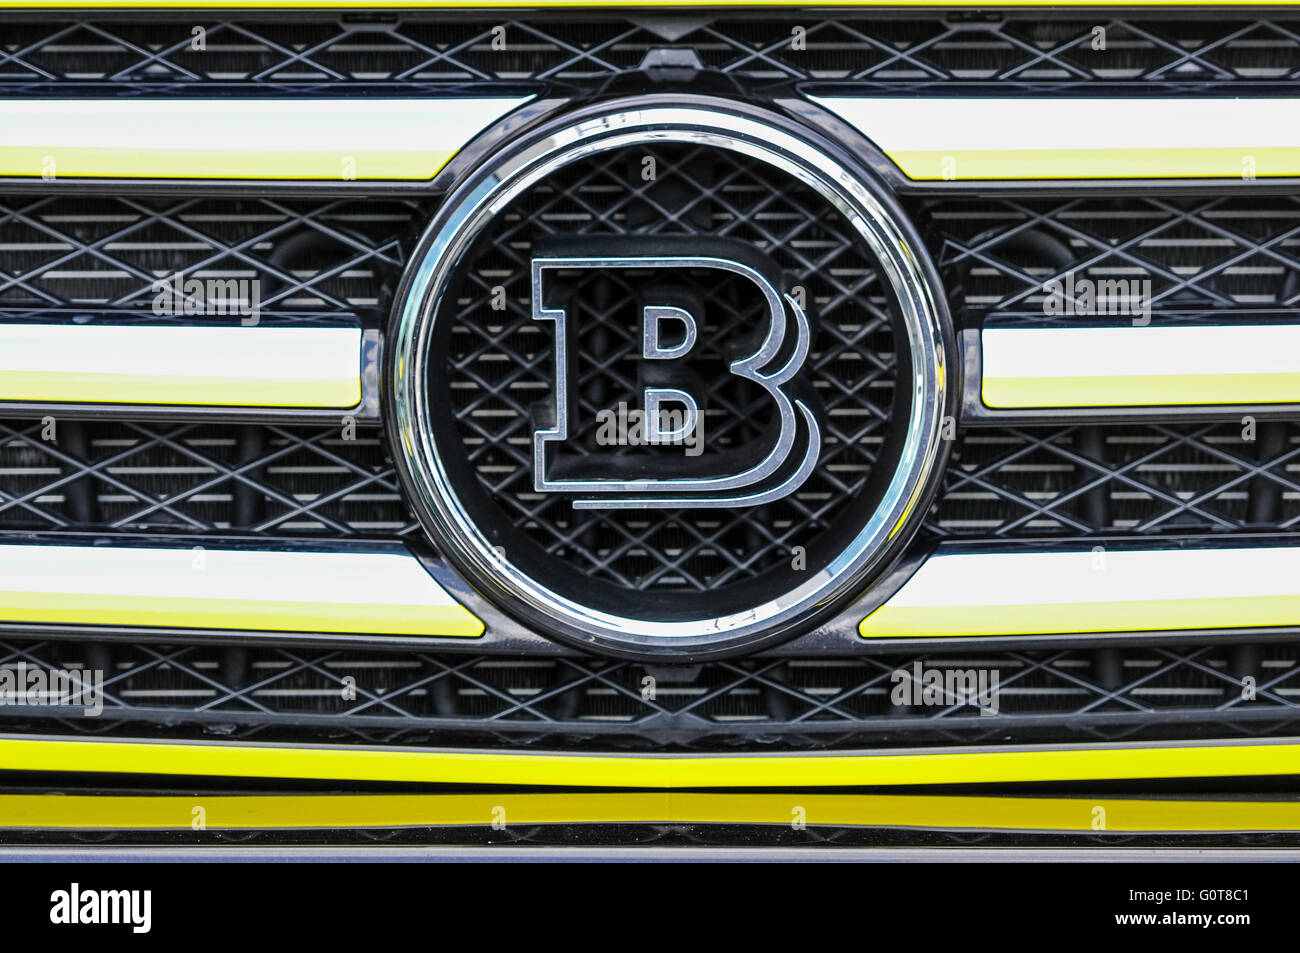 https://c8.alamy.com/comp/G0T8C1/b-badge-on-the-front-of-a-brabus-tuned-mercedes-benz-g-wagon-G0T8C1.jpg